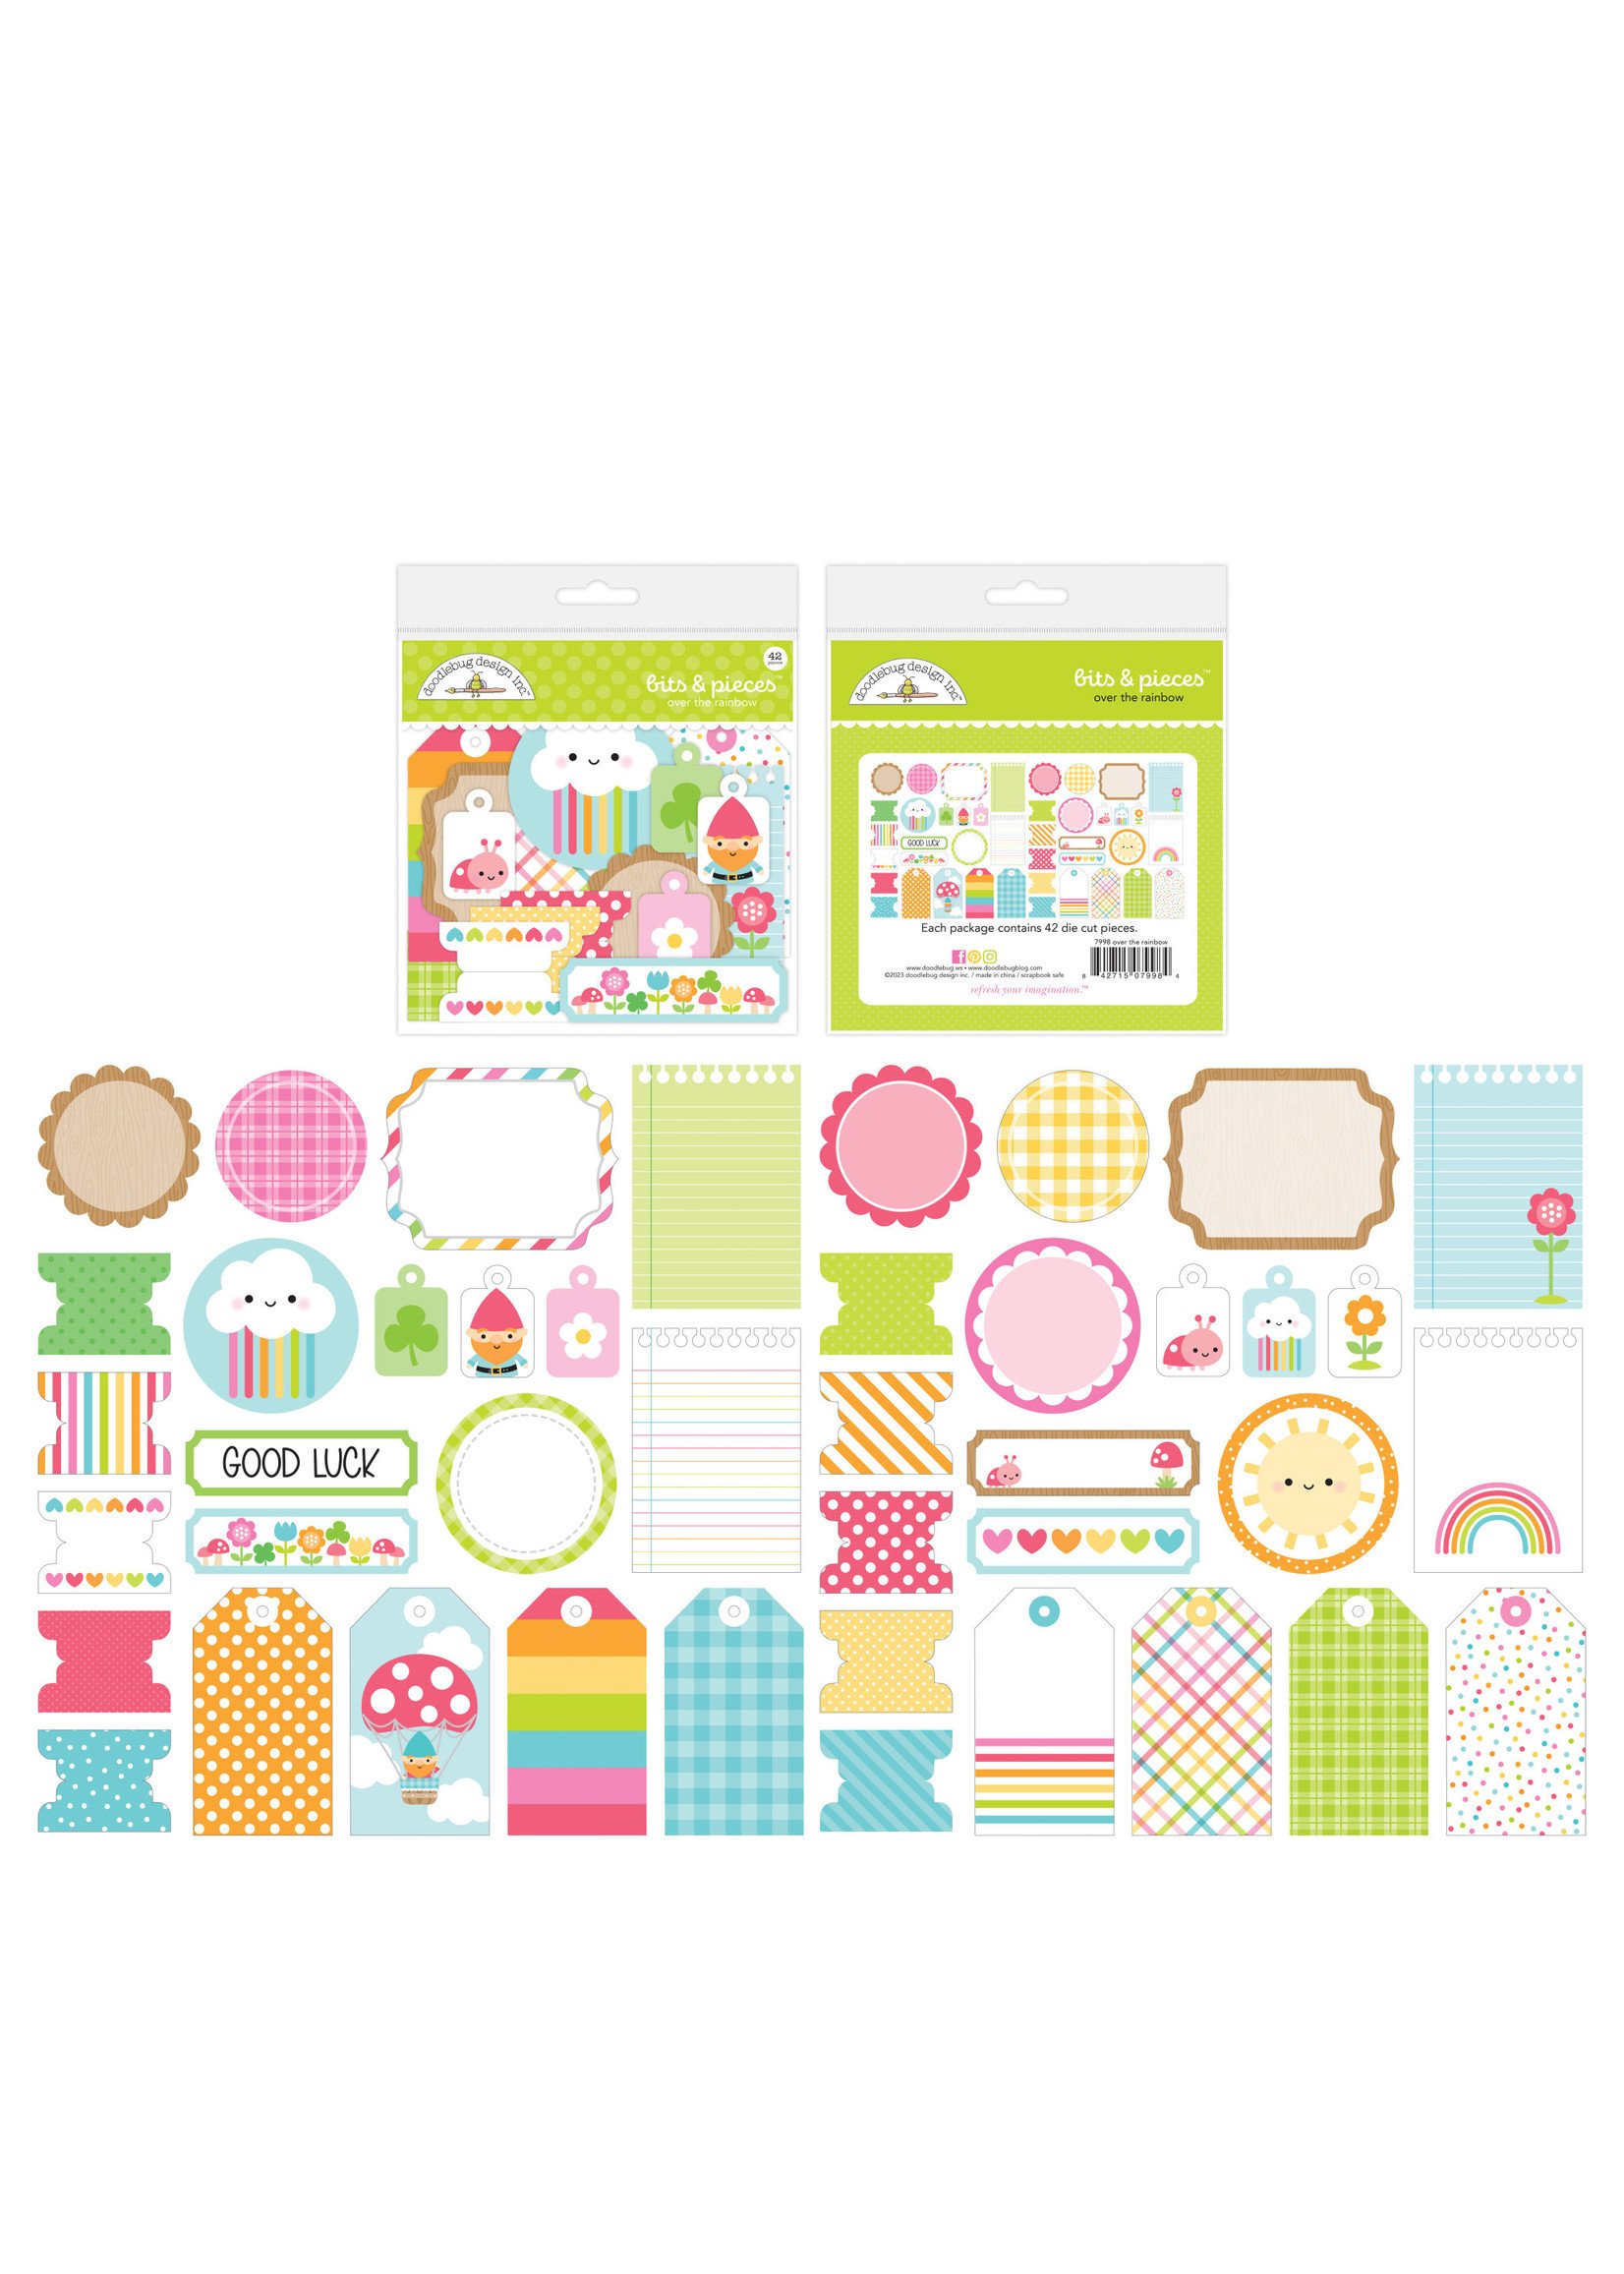 DOODLEBUG over the rainbow: bits & pieces